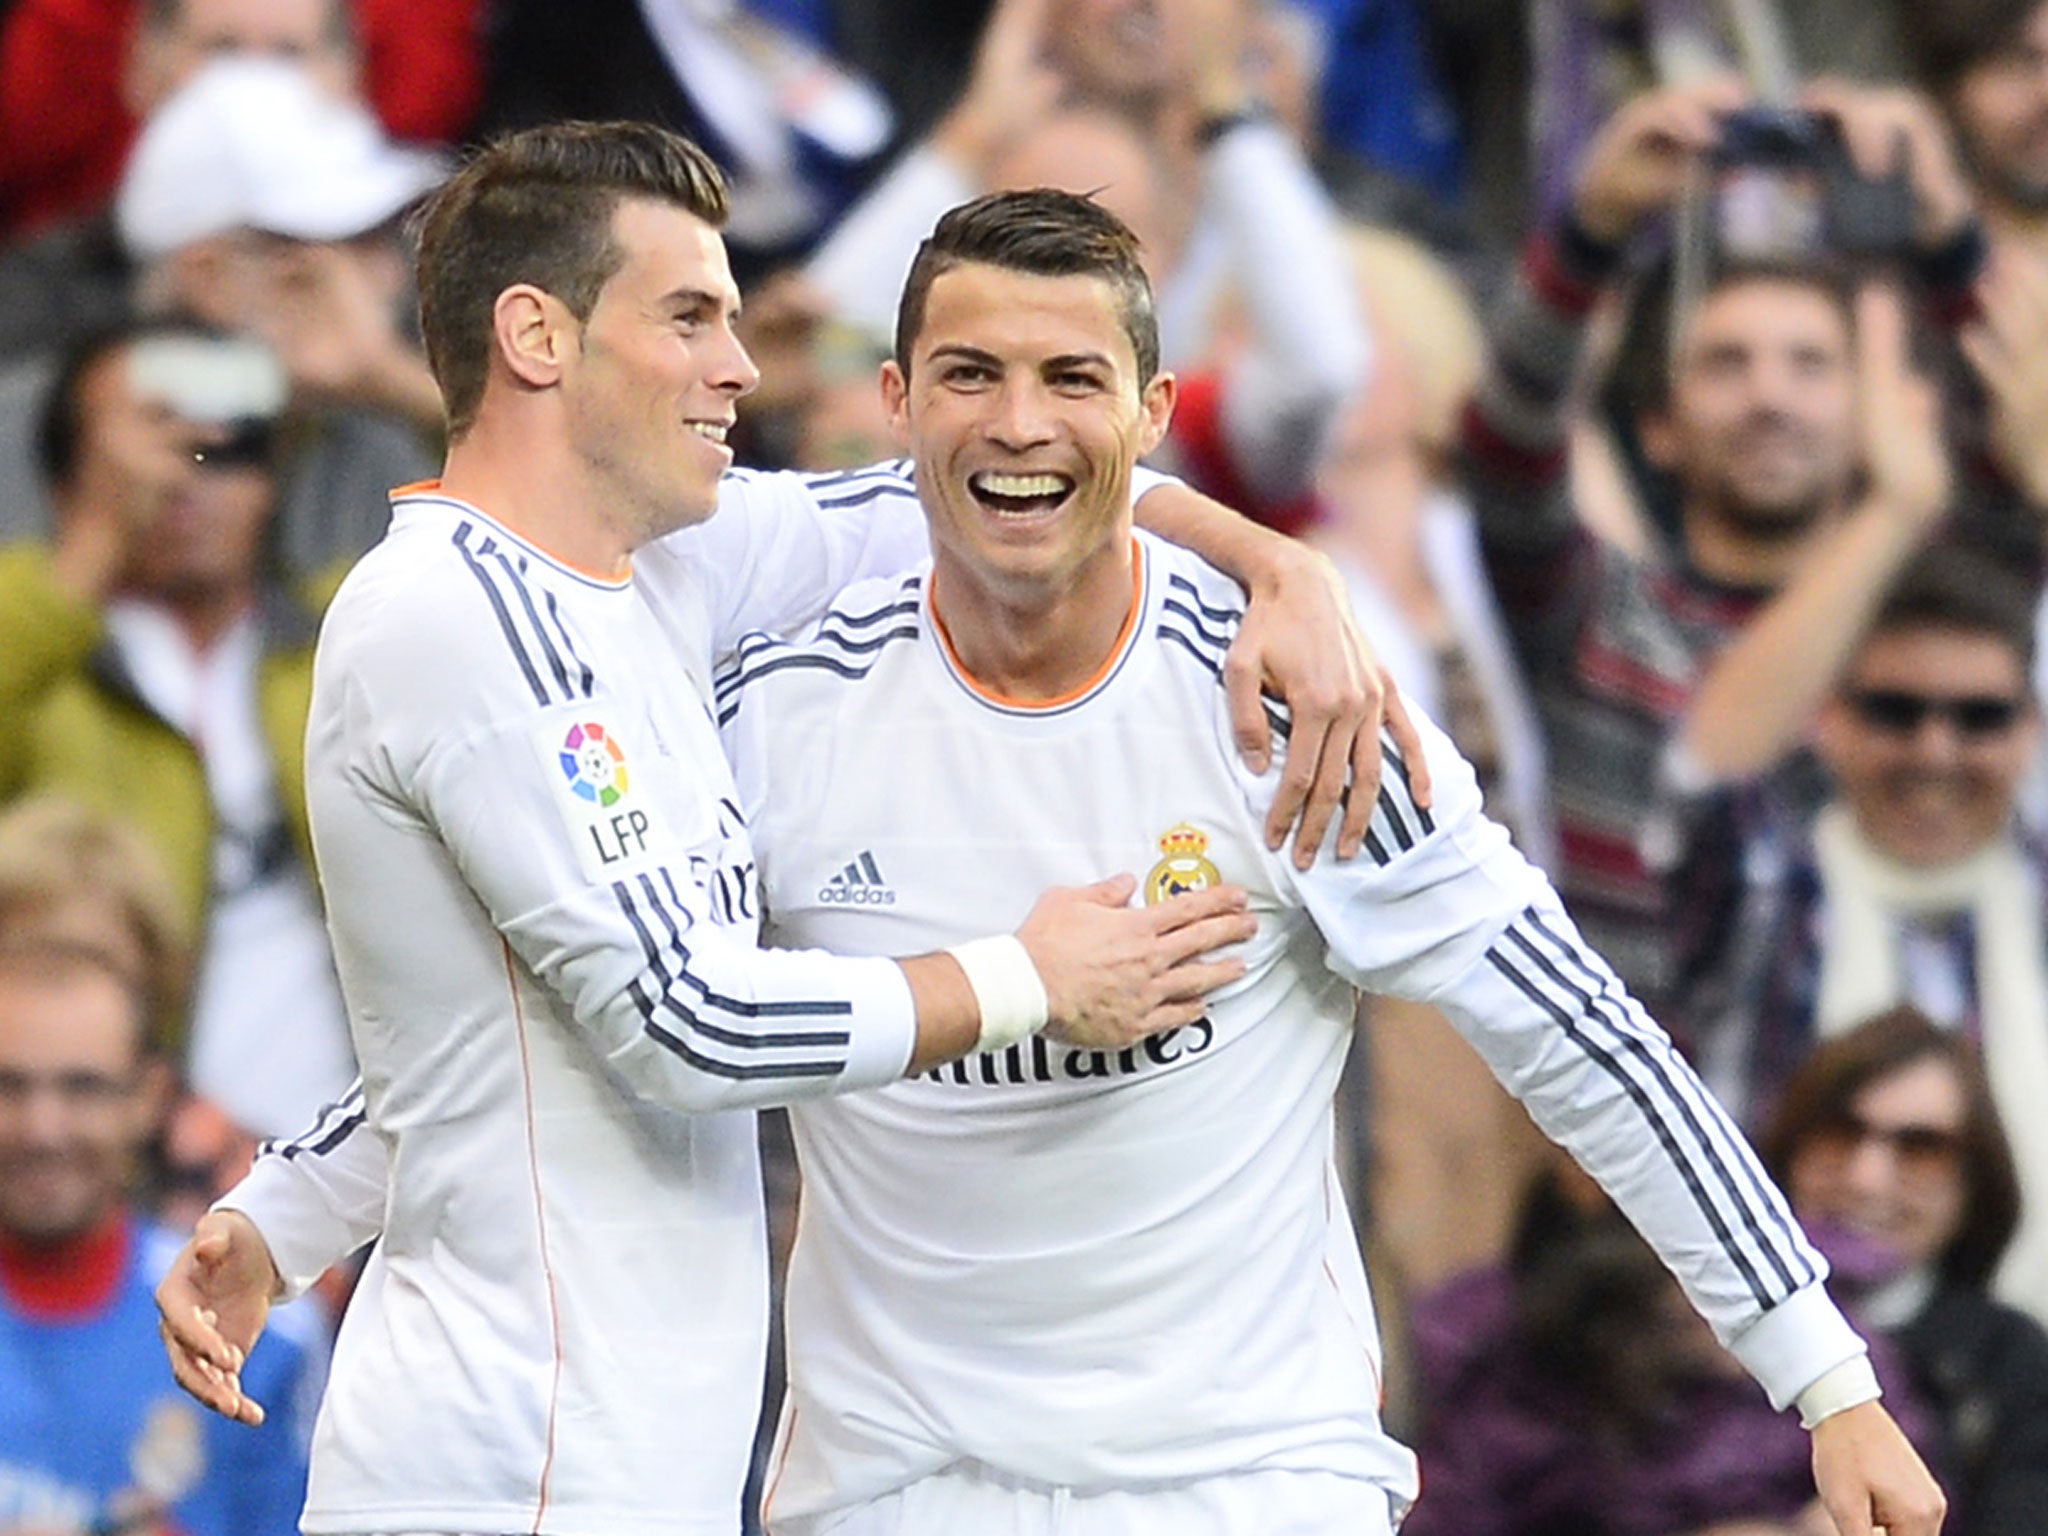 Cristiano Ronaldo (right) celebrates his first goal in the 5-1 win over Real Sociedad with Gareth Bale on 9 November